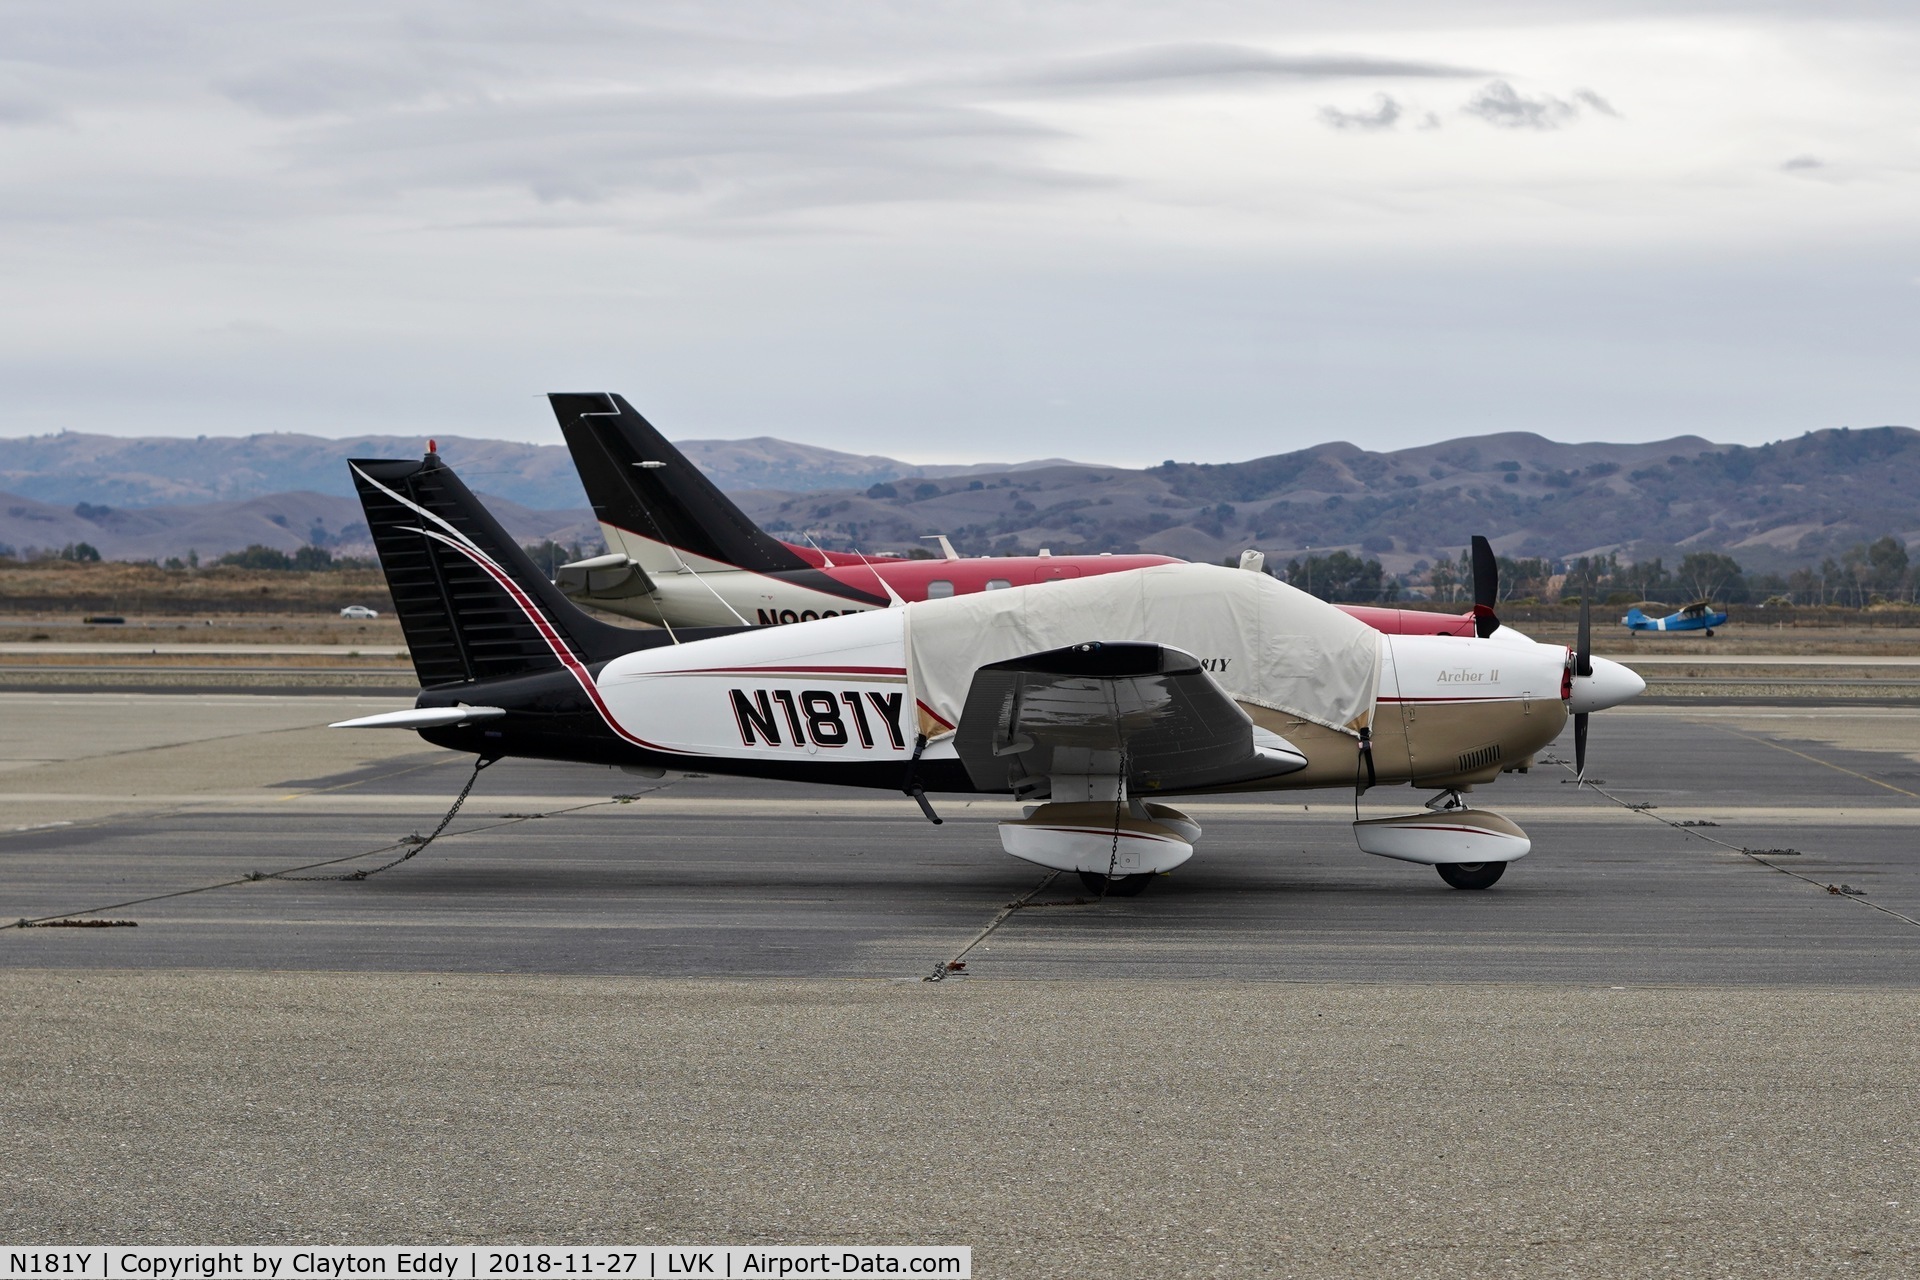 N181Y, 1985 Piper PA-28-181 Archer C/N 28-8590089, Livermore Airport California 2018.